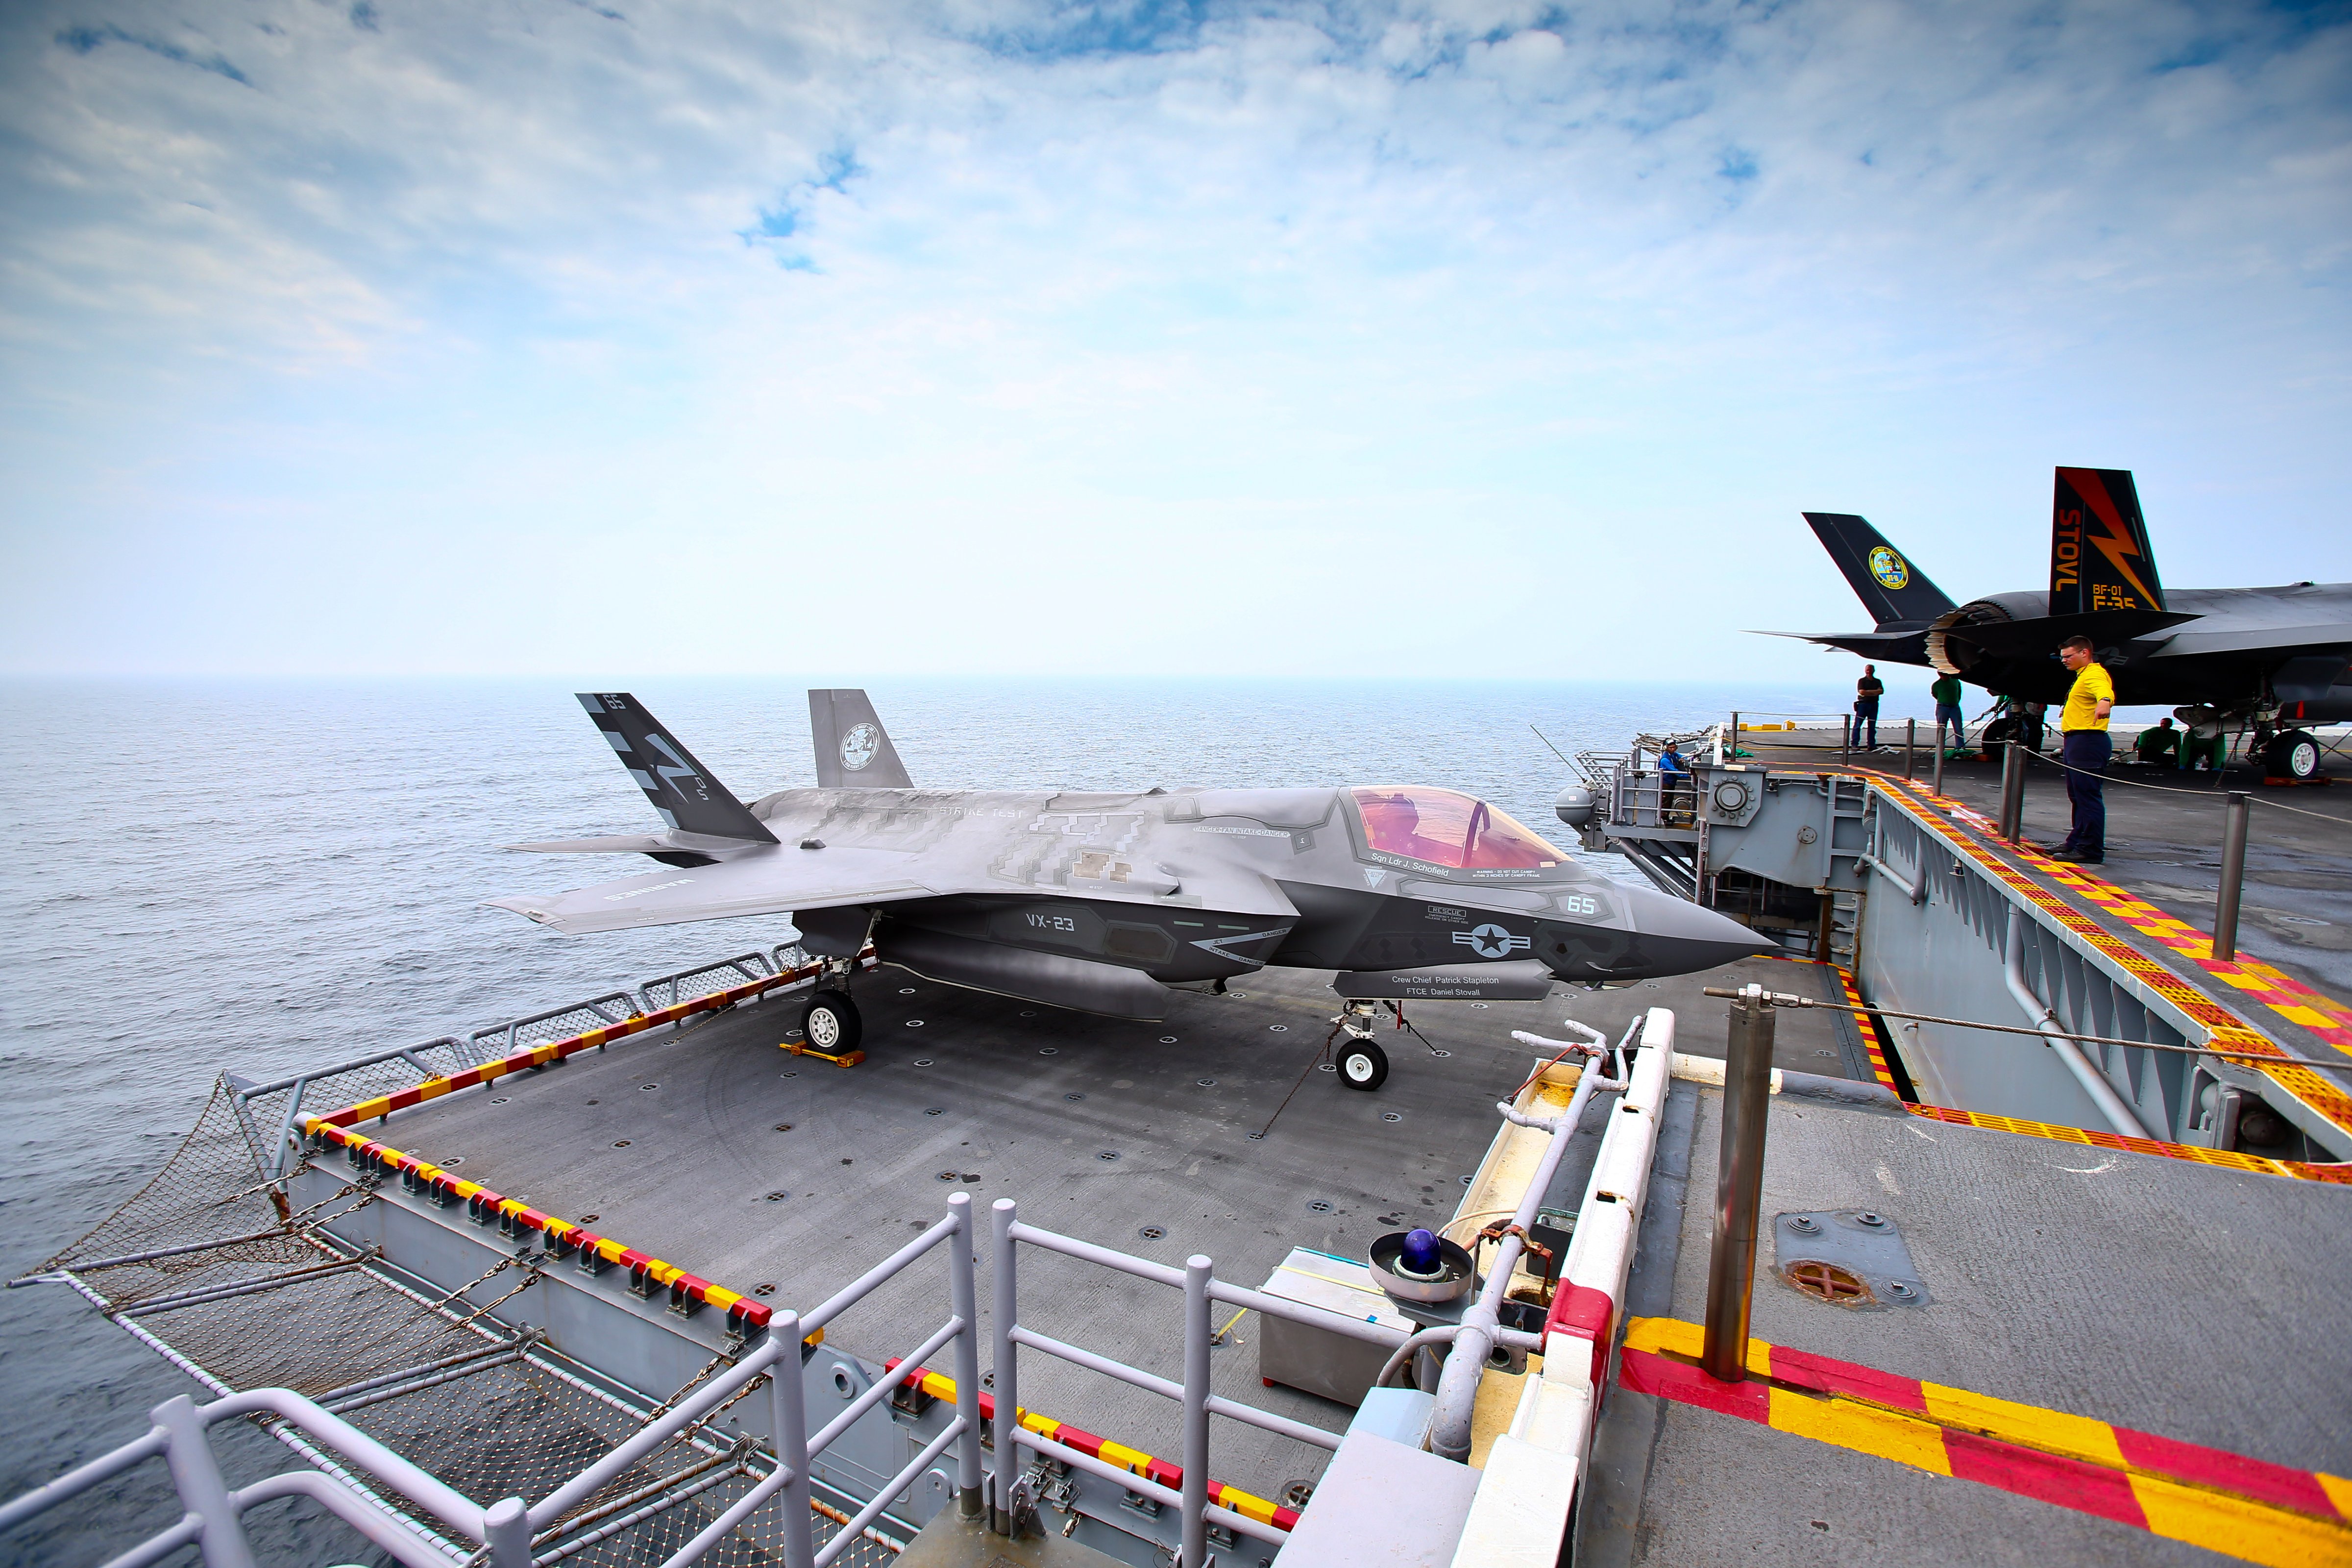 Joint Strike Fighter F-35 Lightning II on the deck of USS Wasp on Aug. 28, 2013 at sea off the coast of Virginia (Simon Bruty—Getty Images)